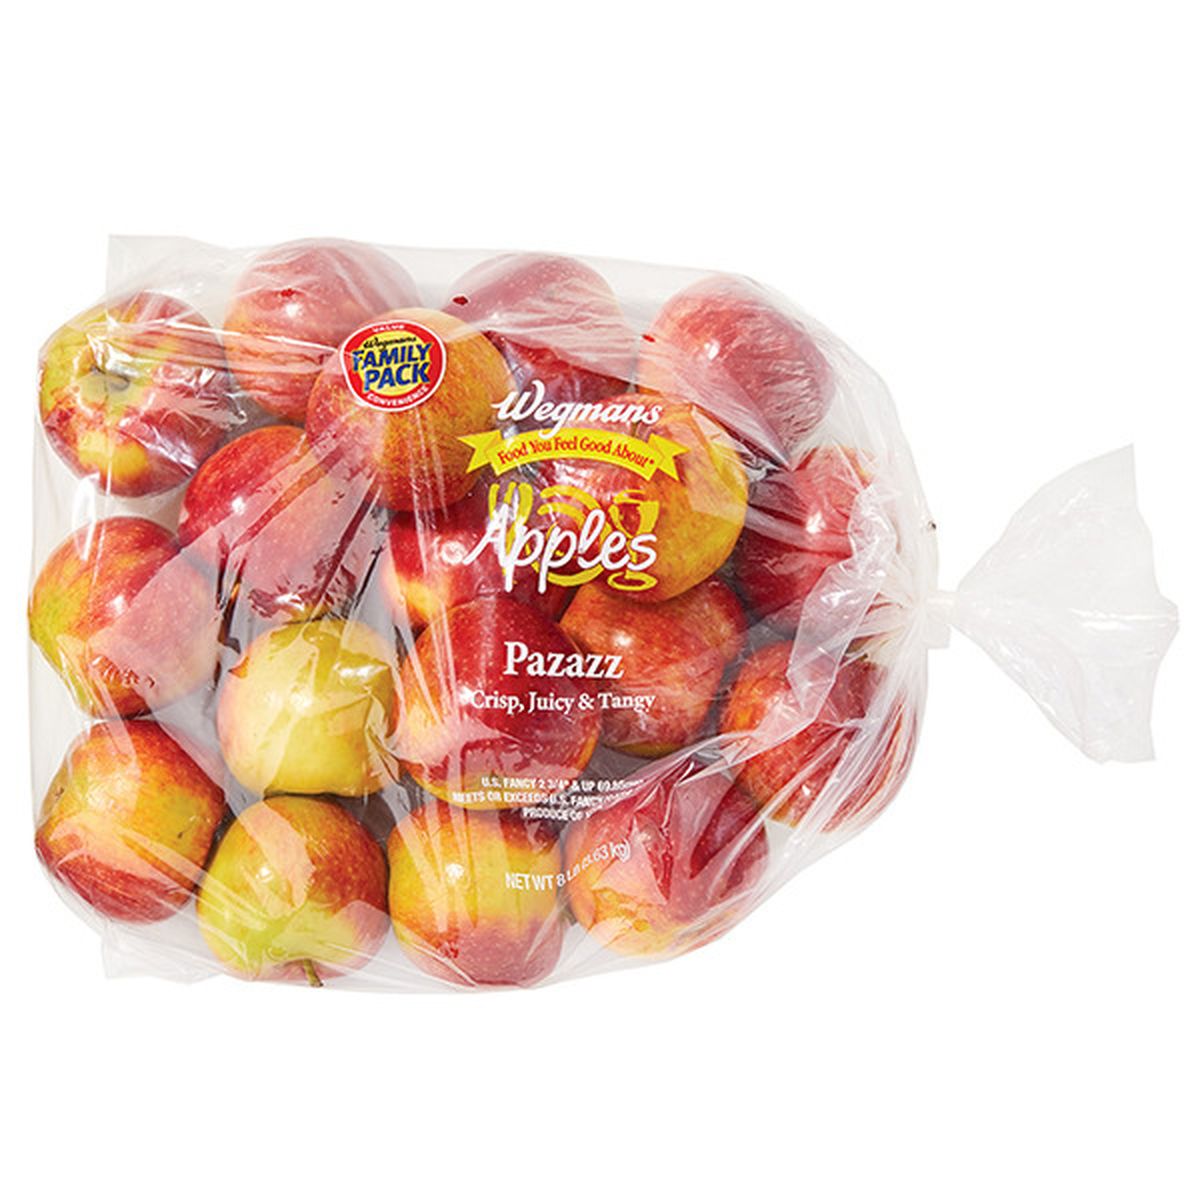 Calories in Pazazz Apples, Bagged